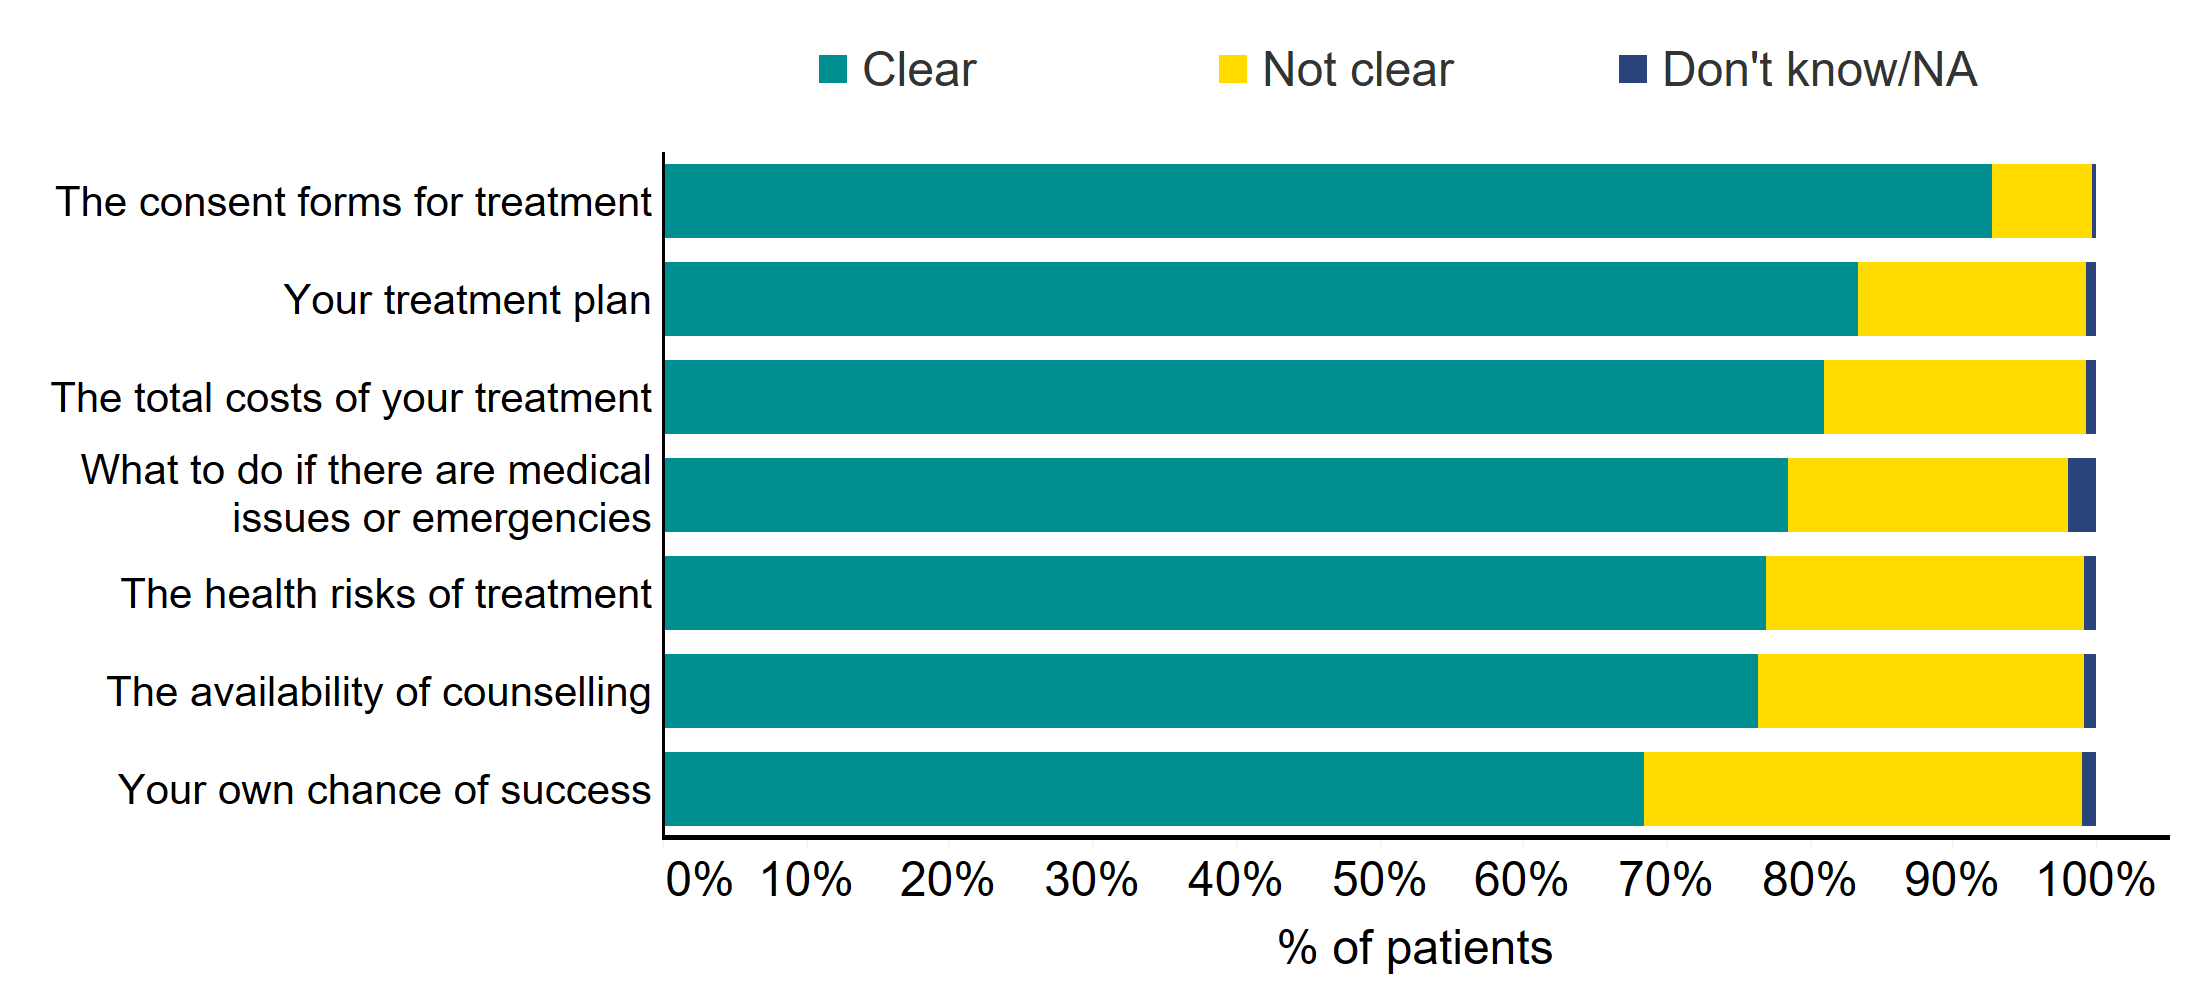 Figure 3: Clarity of communication by clinics prior to treatment starting. Clarity of communication by clinics prior to treatment starting, 2021. This stacked bar chart shows how clear various aspects of treatment were communicated by clinics prior to starting treatment. Patients were most likely to say the clinic clearly communicated the consent forms and treatment plan. Patients were least likely to find communication of their own chances of success, and the availability of counselling clear. An accessible form of the underlying data for this figure can be downloaded at the start of the report in .xls format.